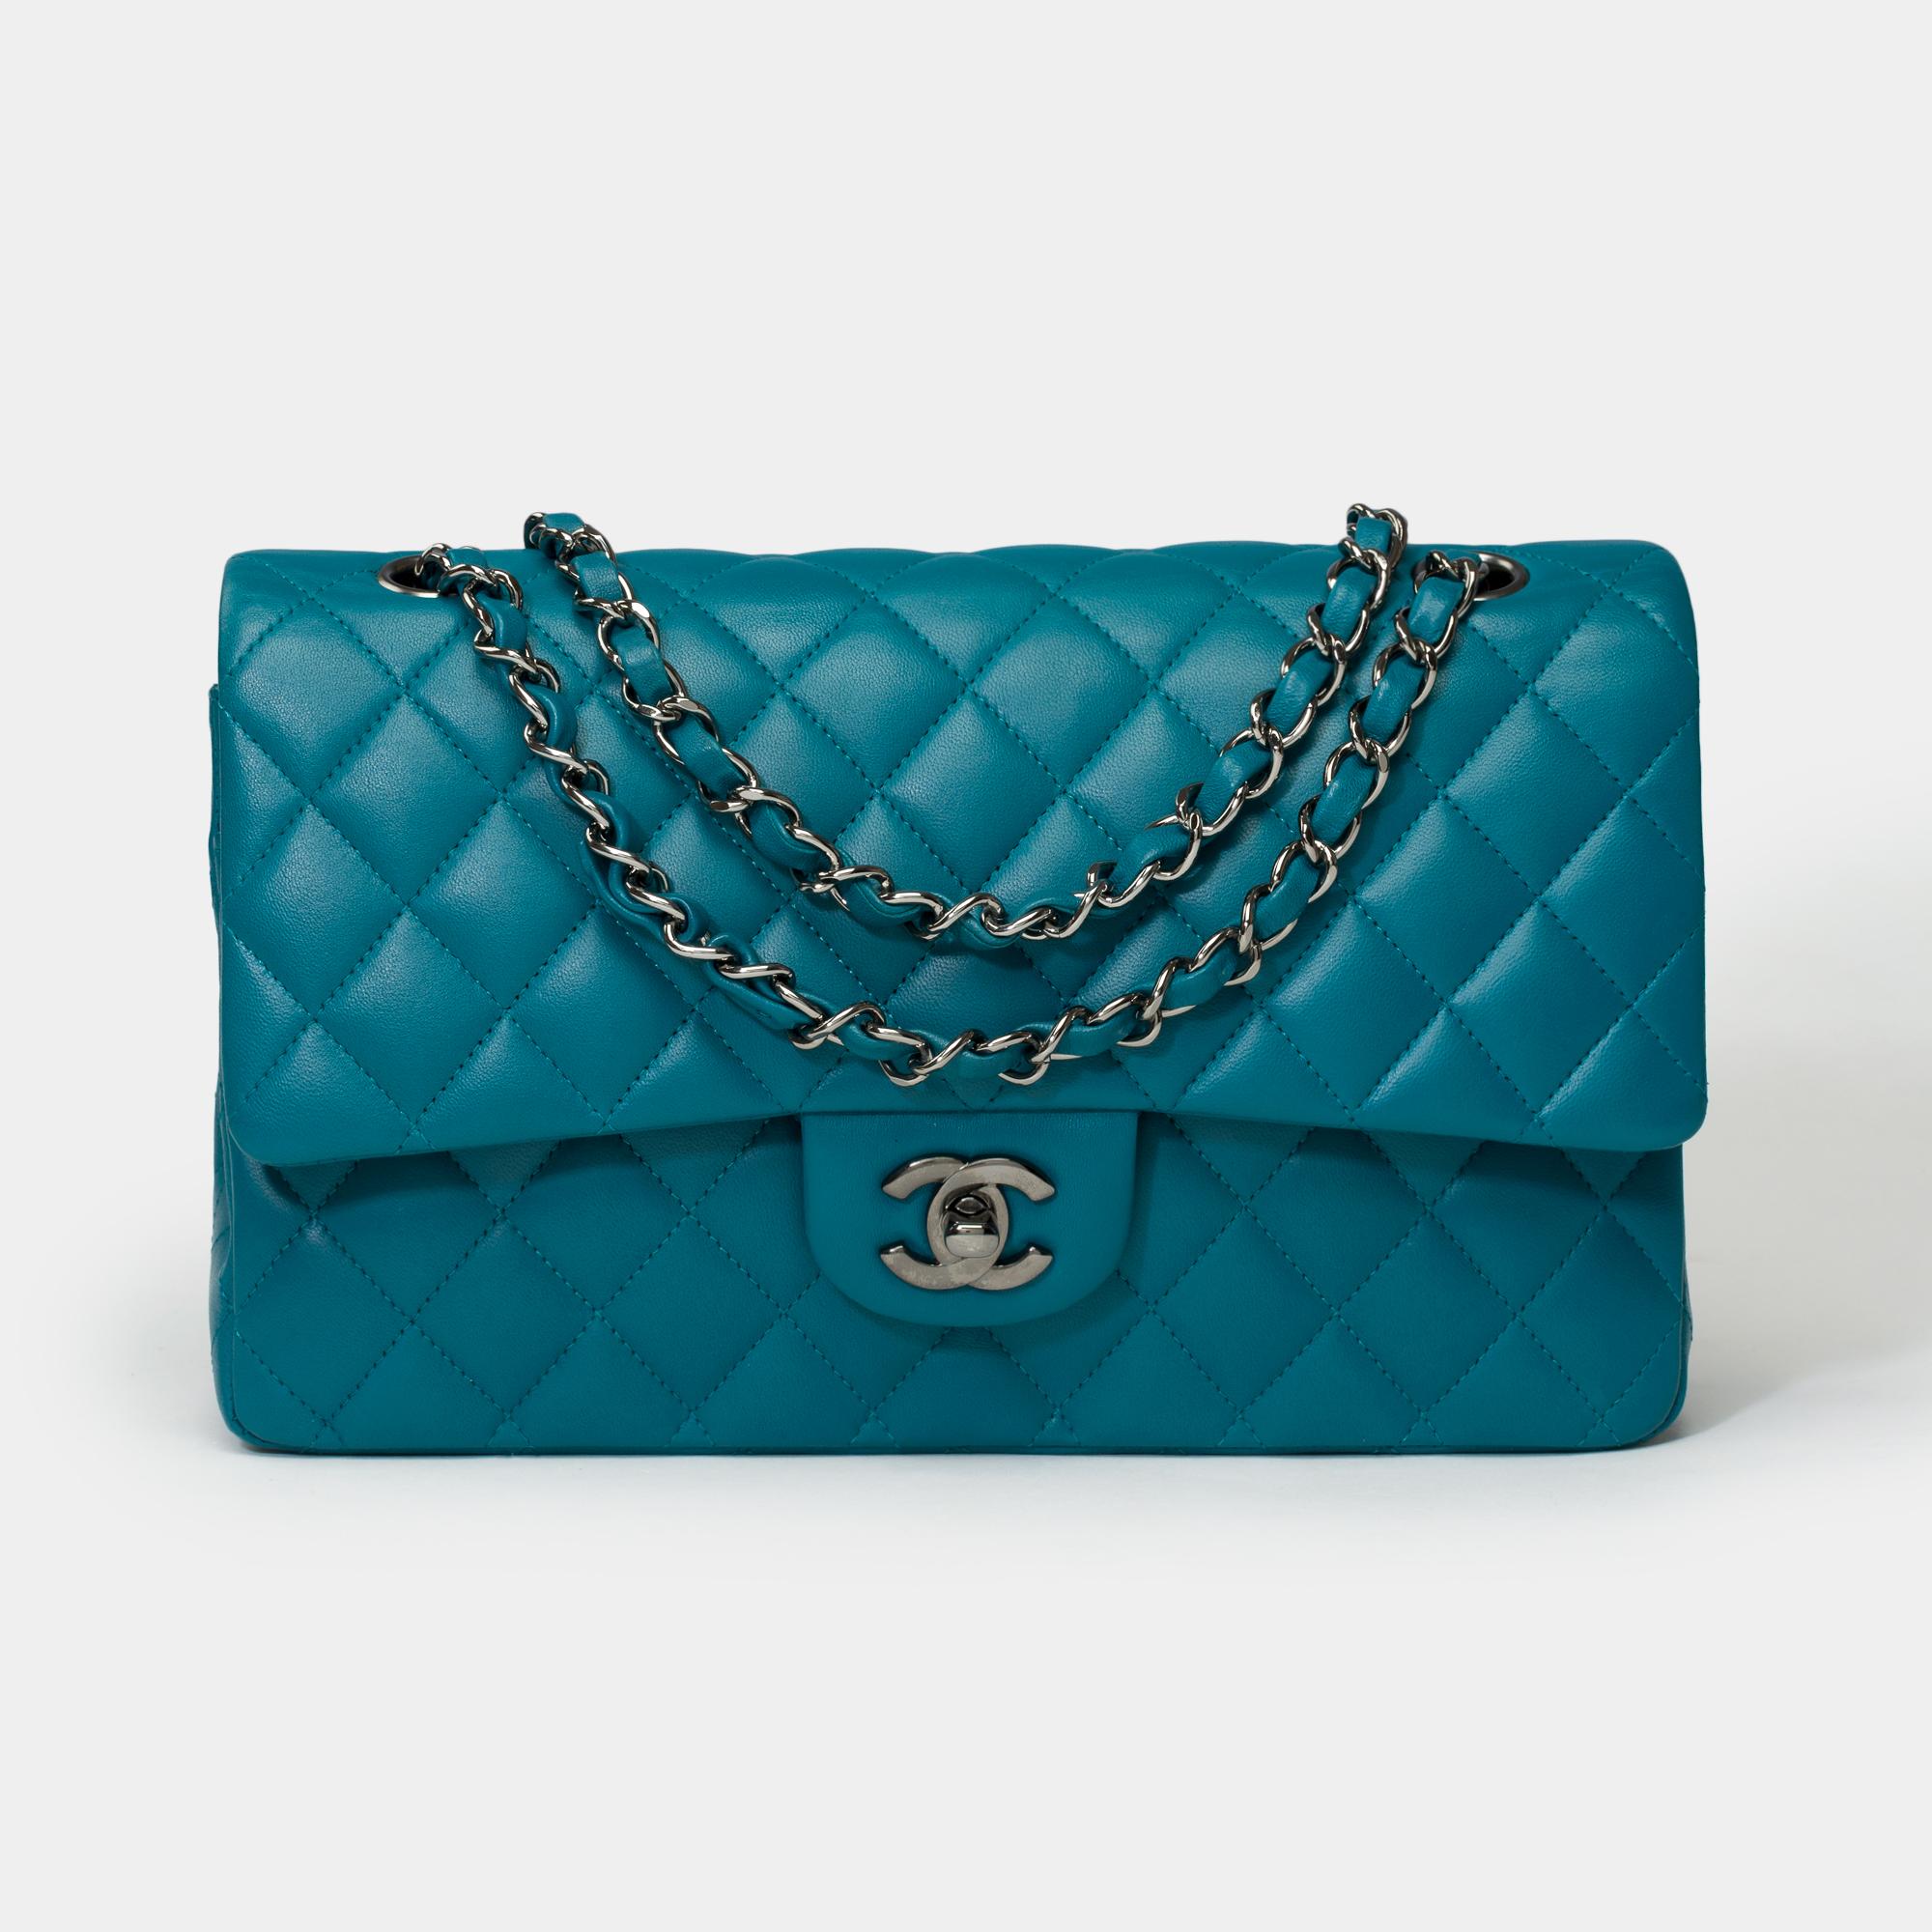 Exceptional​​ ​​&​​ ​​Rare​​ ​​Chanel​​ ​​Timeless​​ ​​Medium​​ ​​25cm​​ ​​double​​ ​​flap​​ ​​shoulder​​ ​​bag​​ ​​in​​ ​Turquoise​​ ​​quilted​​ ​​lambskin​​ ​​leather,​​ ​​blackened​ ​silver​ ​metal​ ​trim,​​ ​​a​​ ​​chain​​ ​​handle​​ ​​in​​